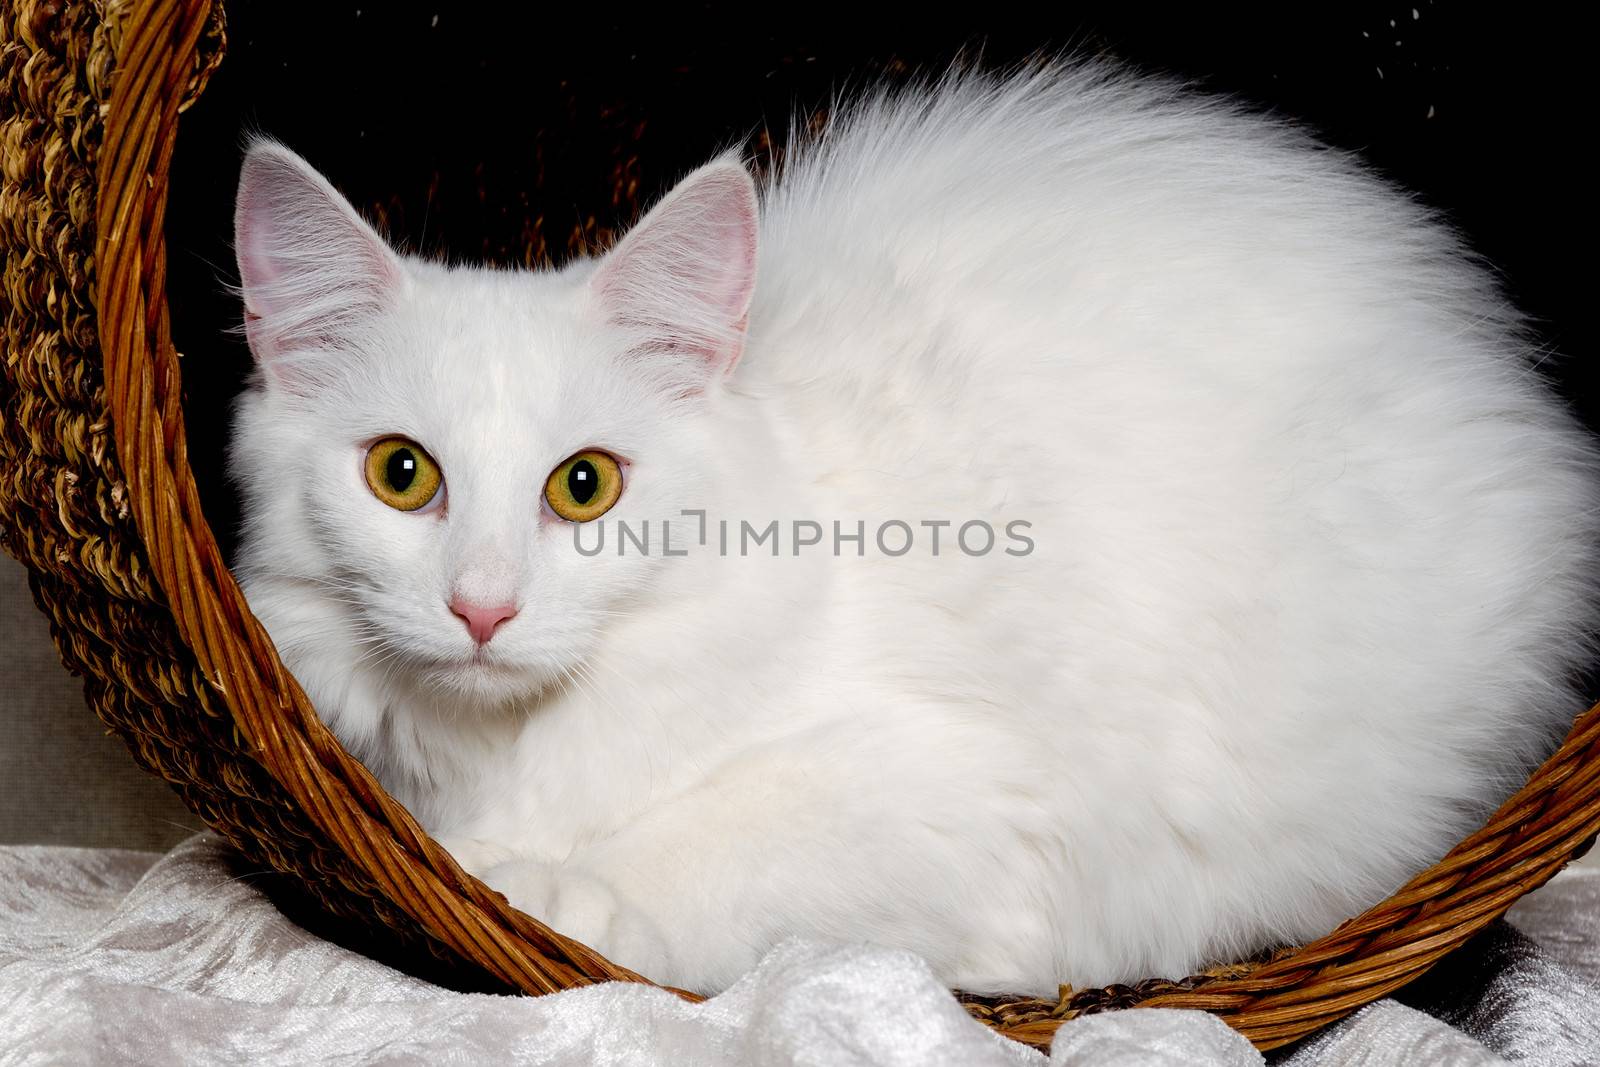 White cat in a basket